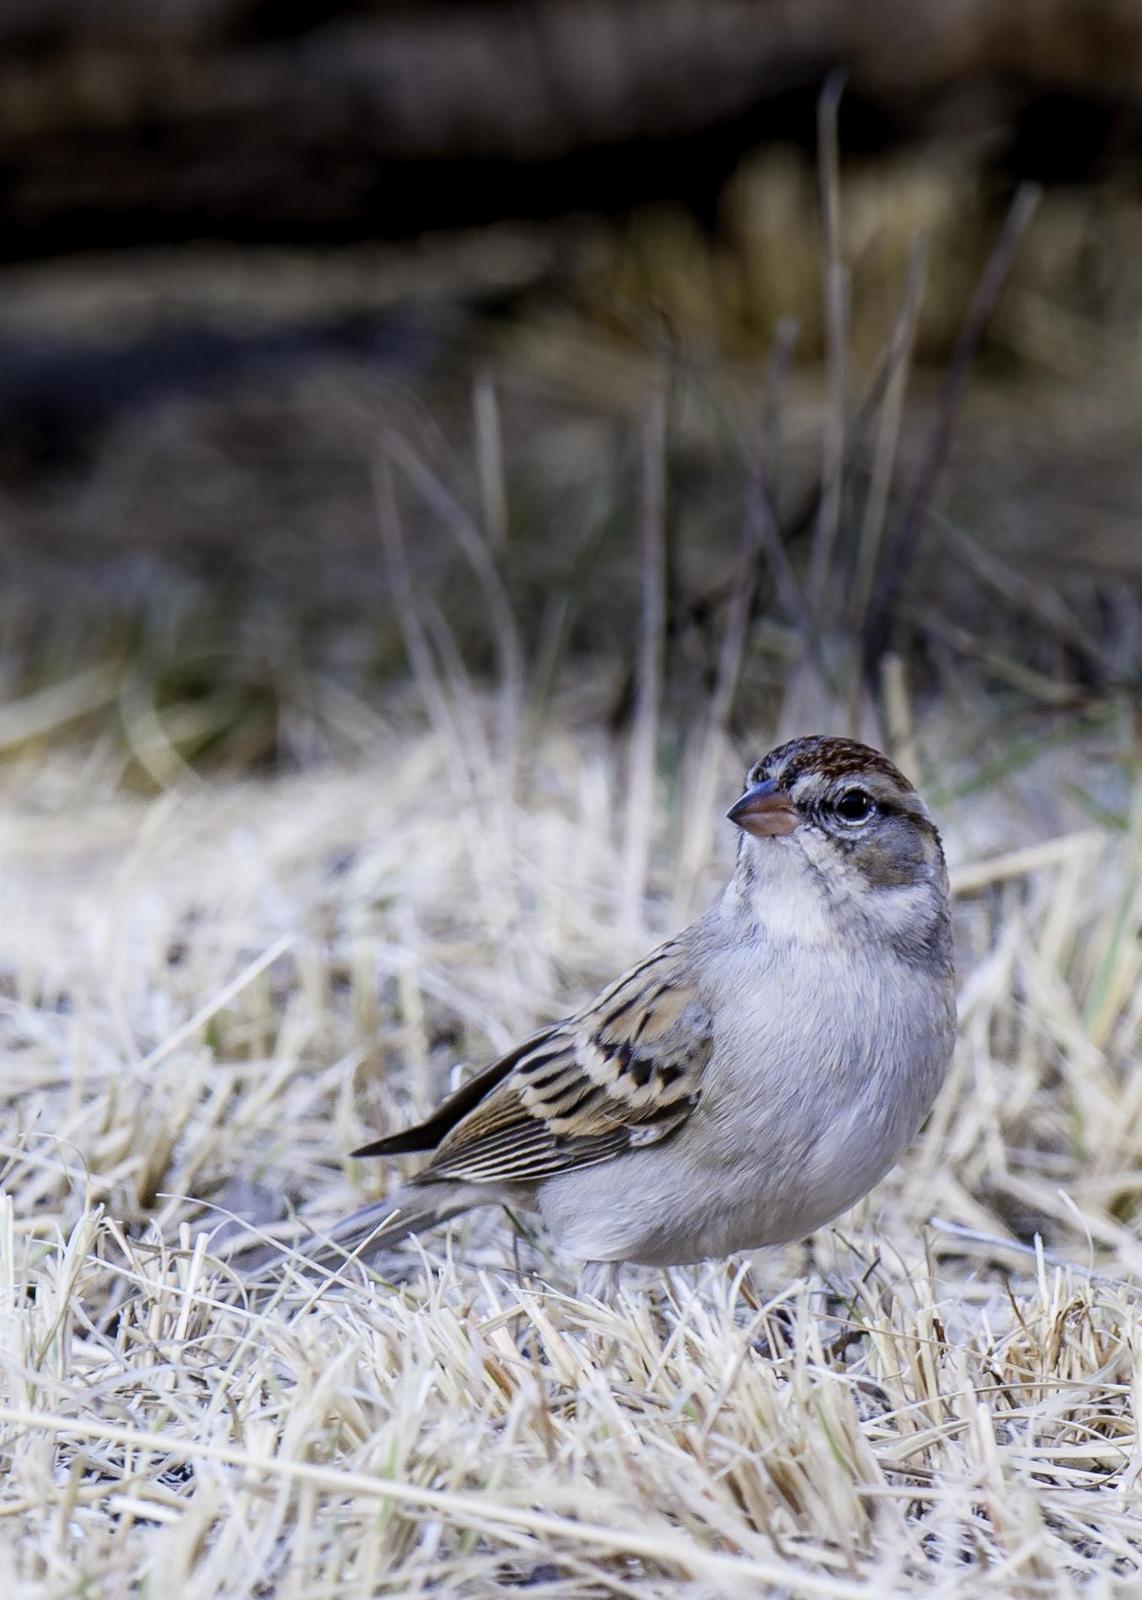 Chipping Sparrow Photo by Mason Rose